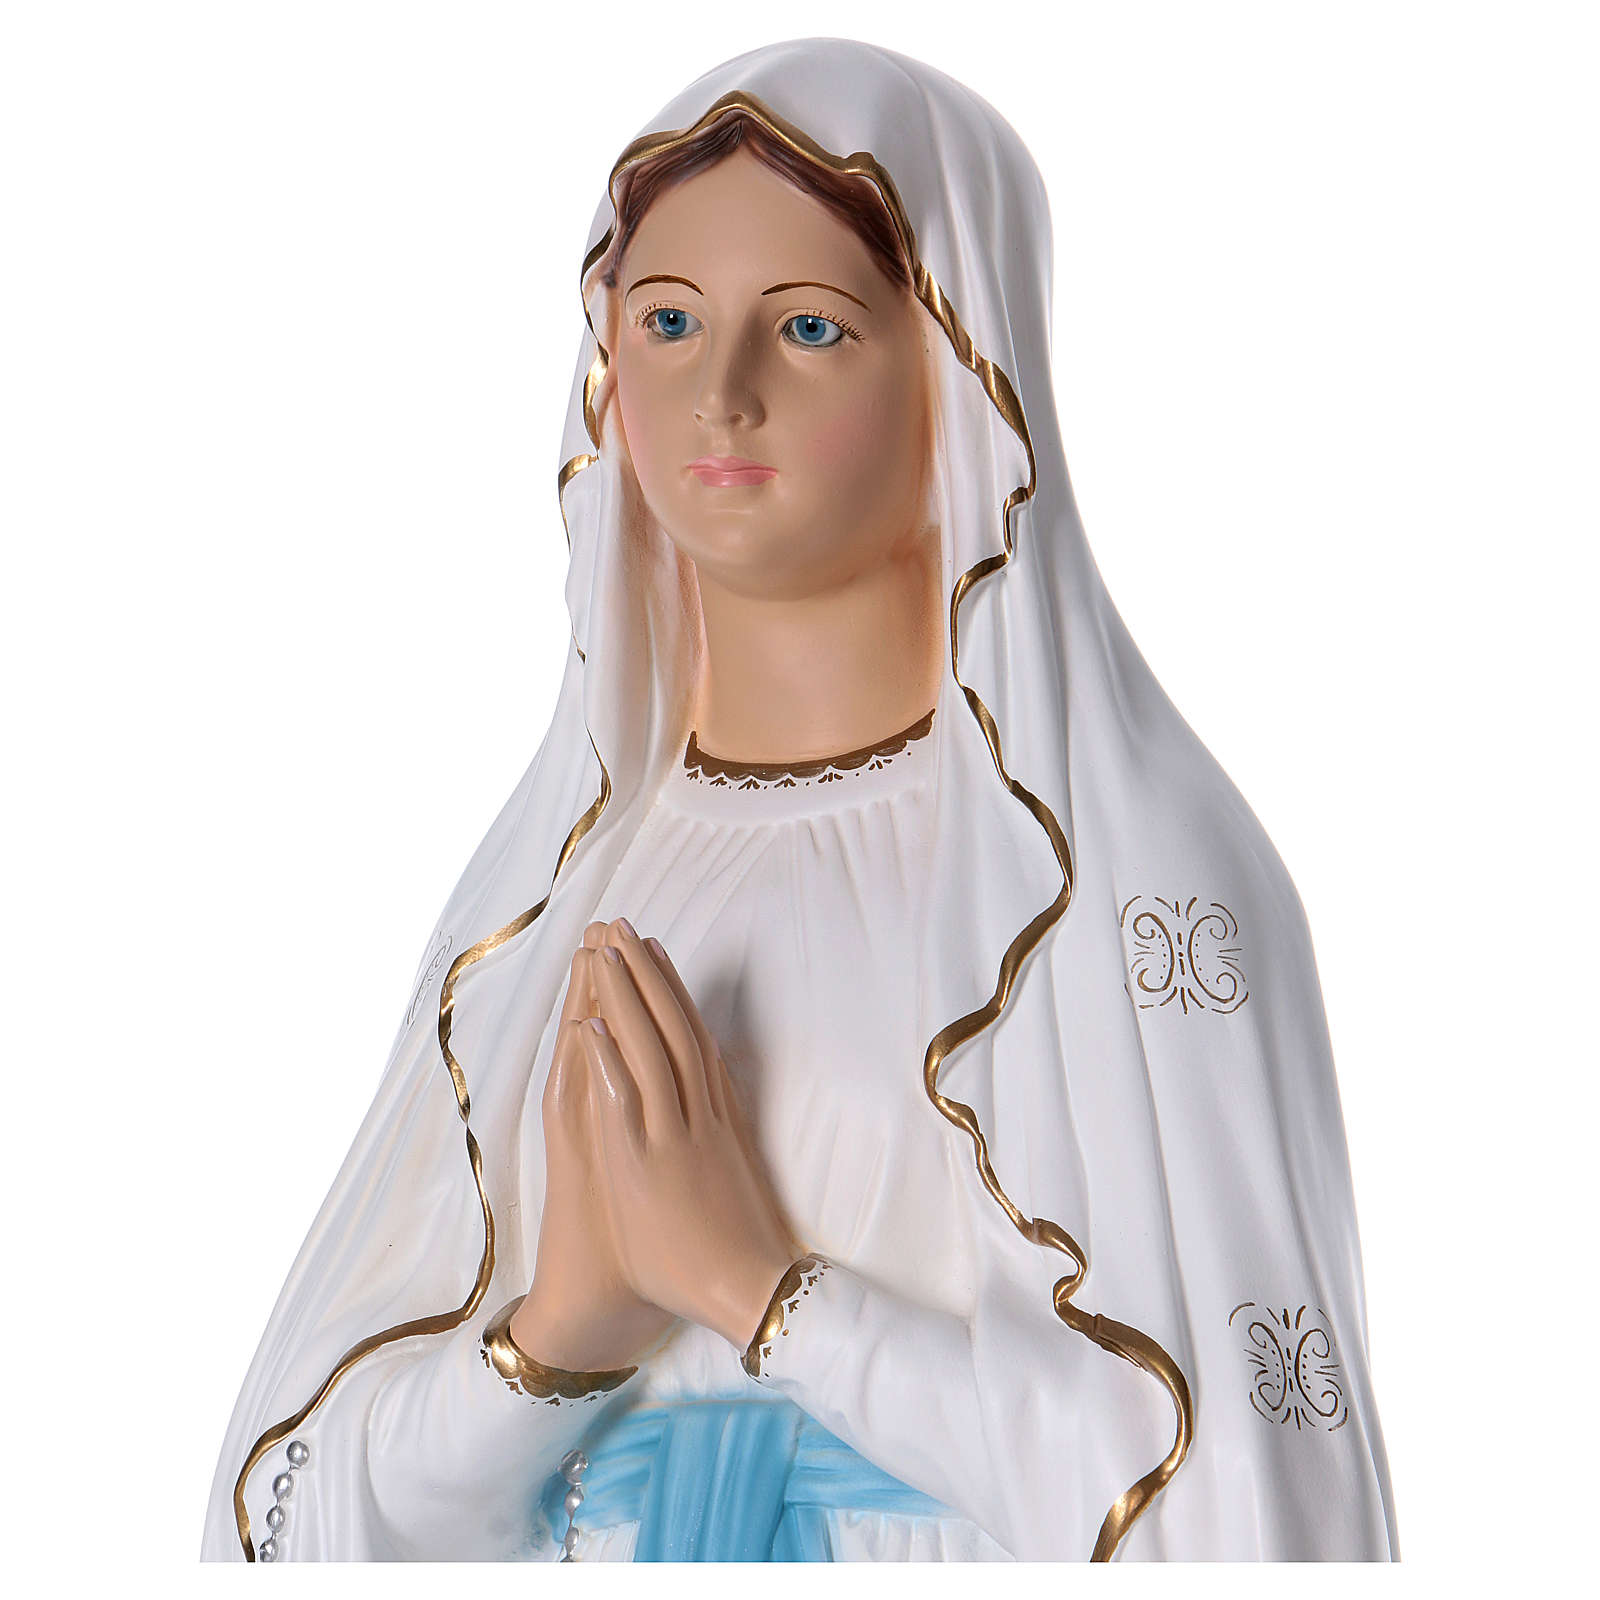 Our Lady Of Lourdes Statue In Resin 130 Cm Online Sales On HOLYART co uk